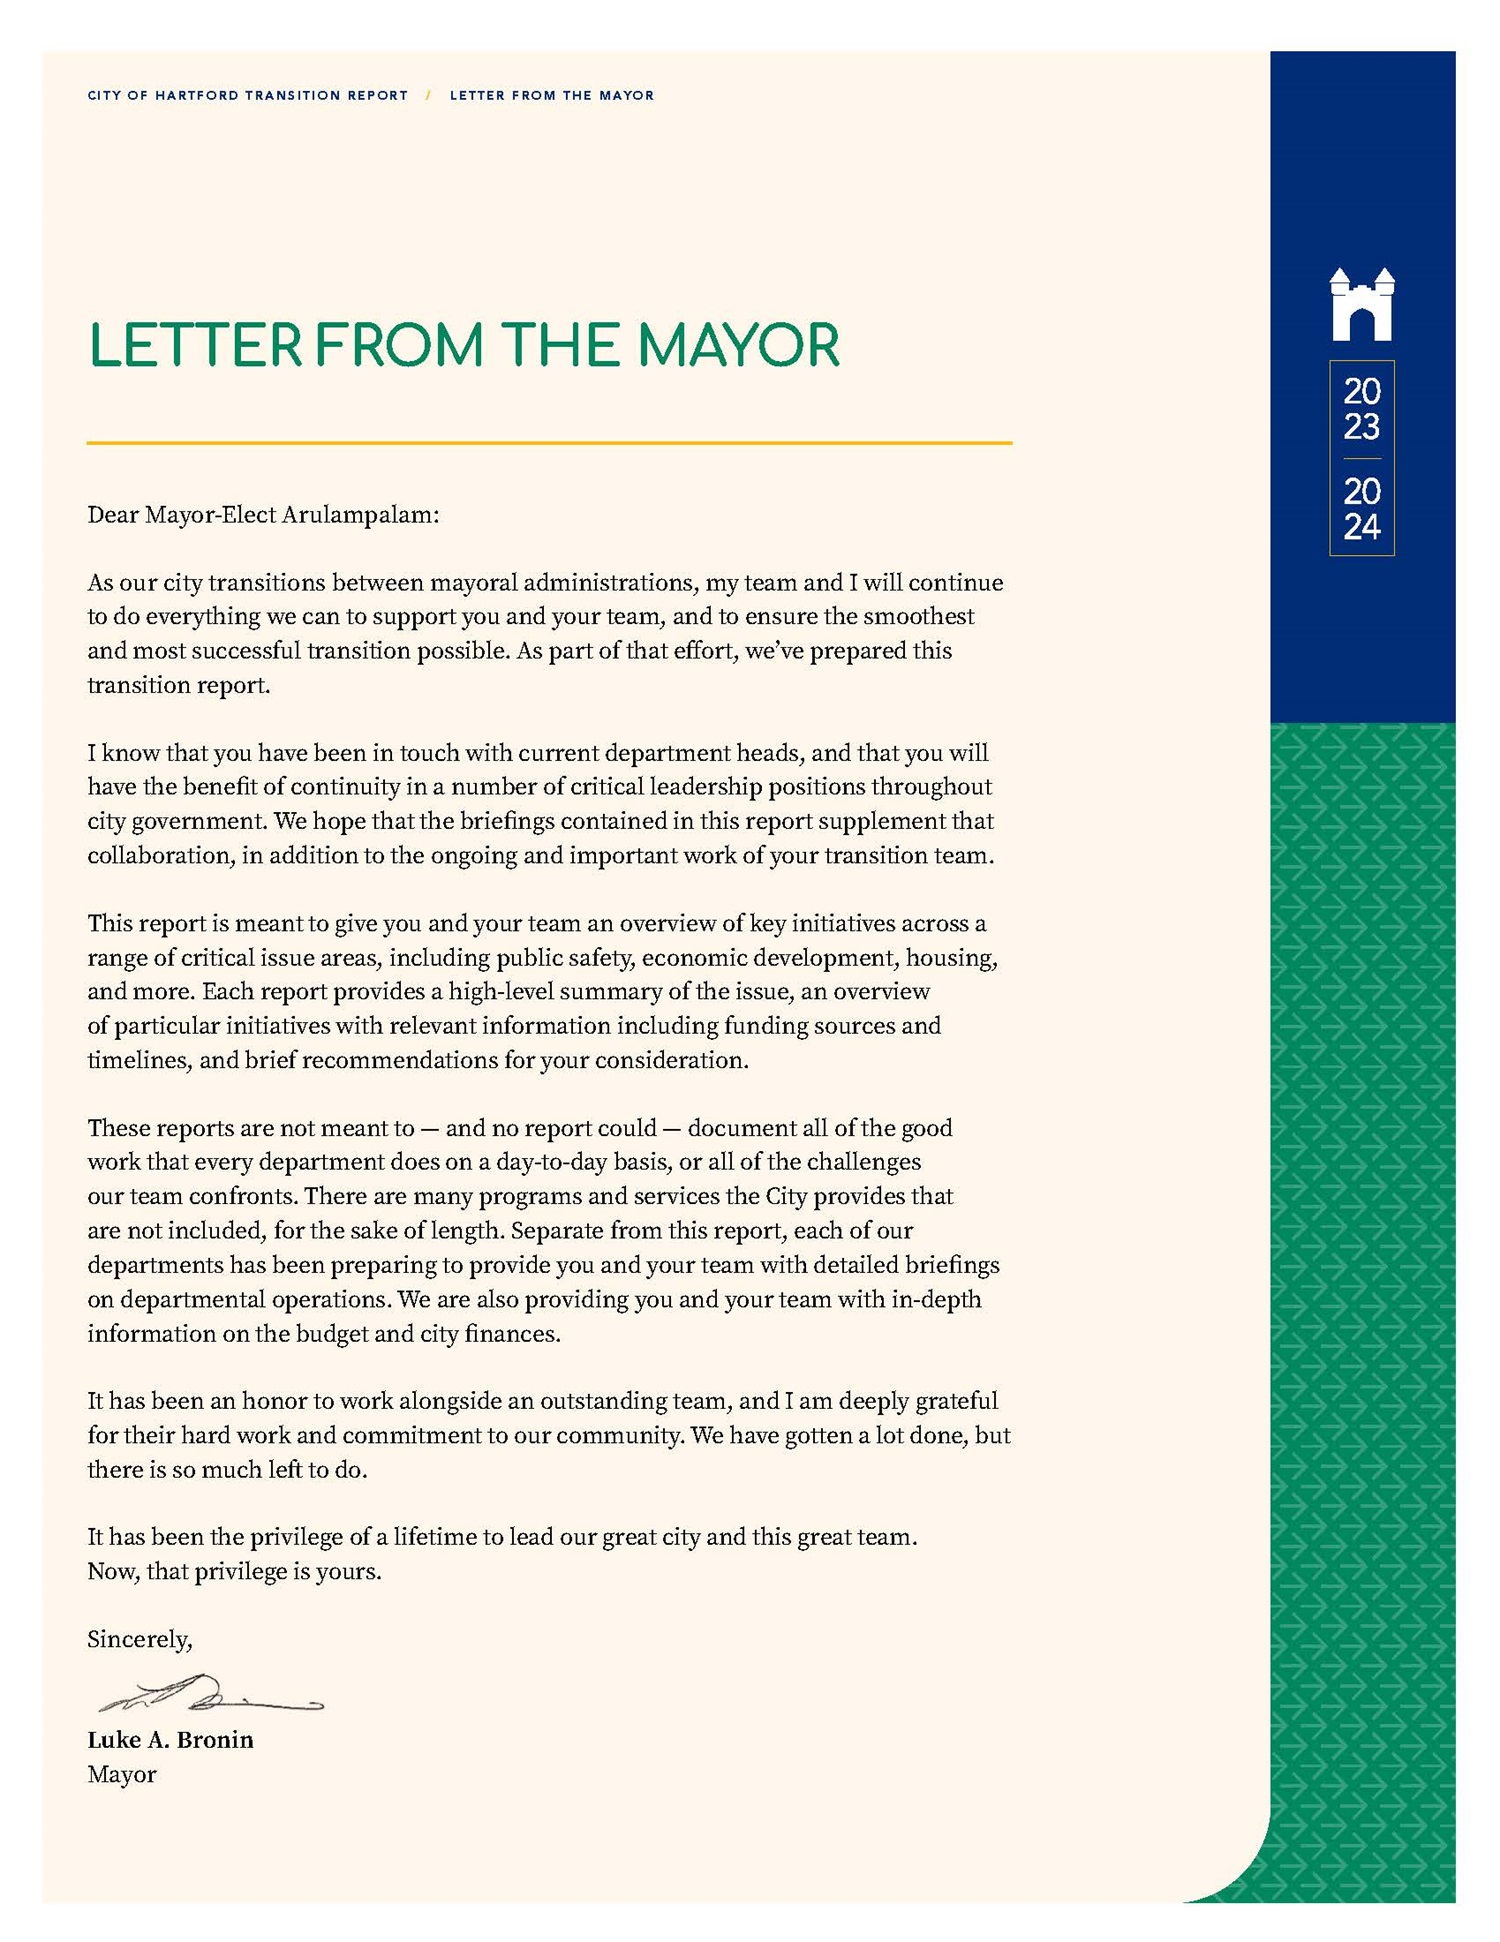 Letter from Mayor Bronin to Mayor-Elect Arulampalam